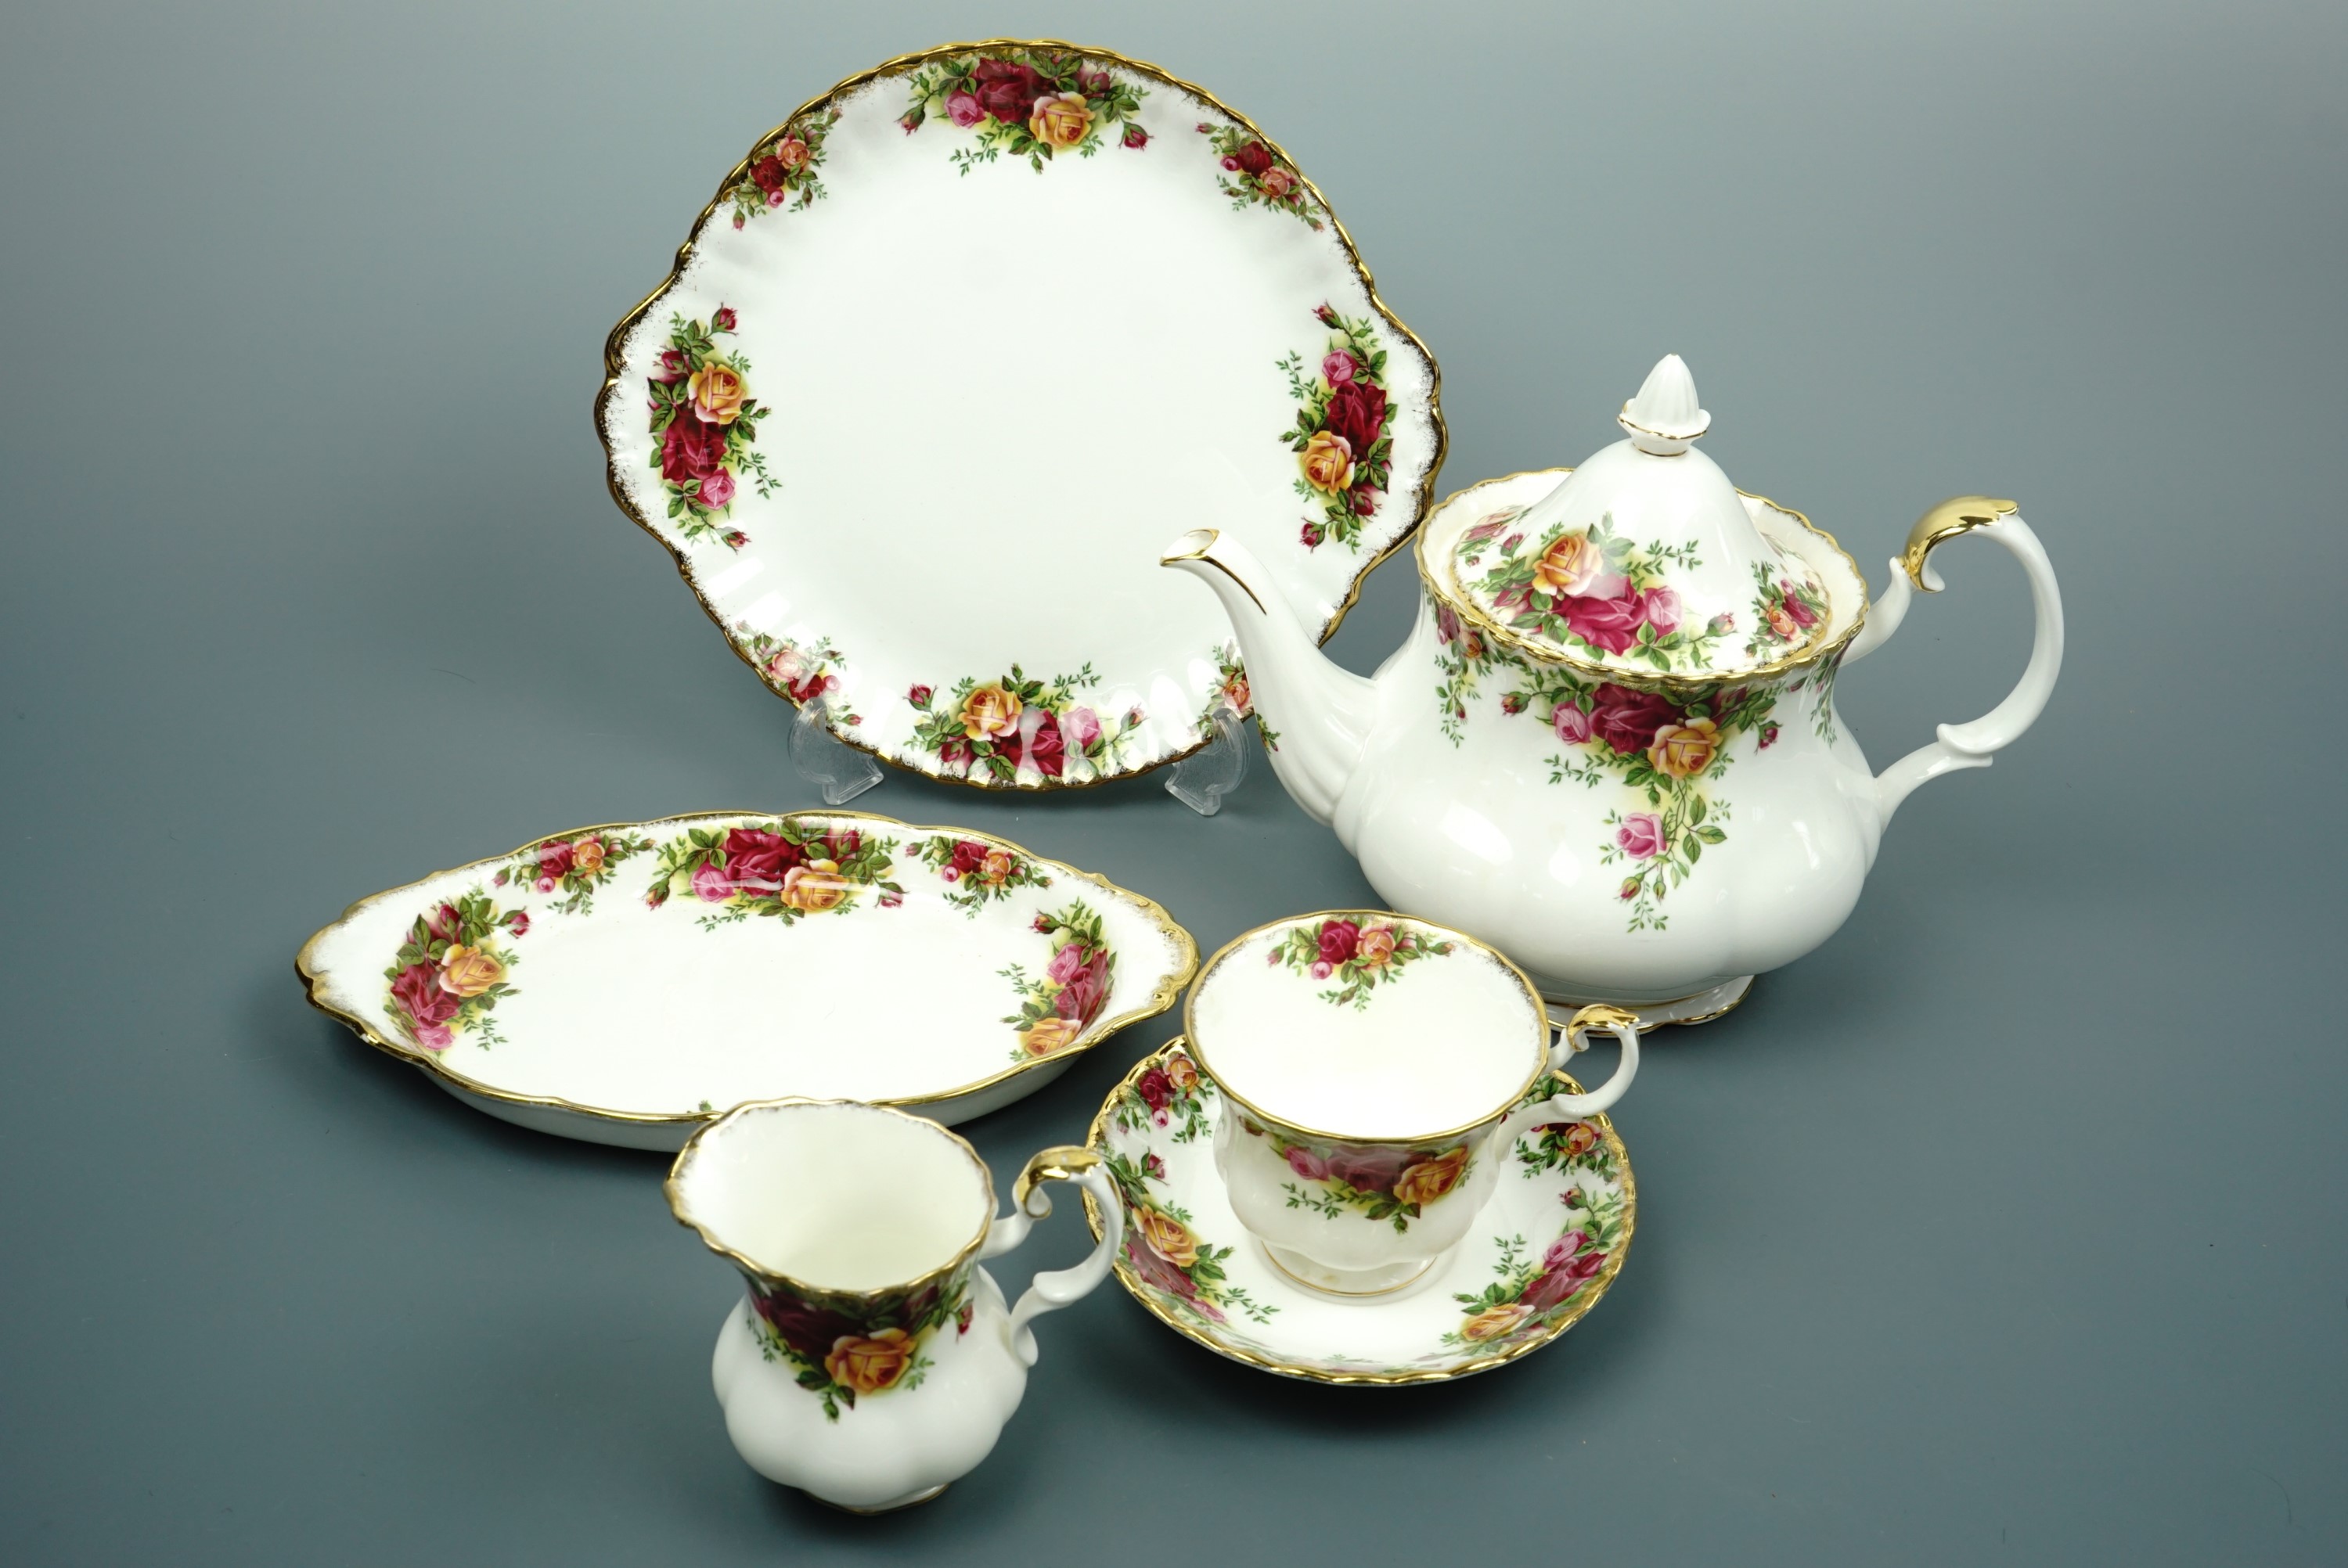 A quantity of Royal Albert Old Country Rose tea and dinnerware, approximately 75 items